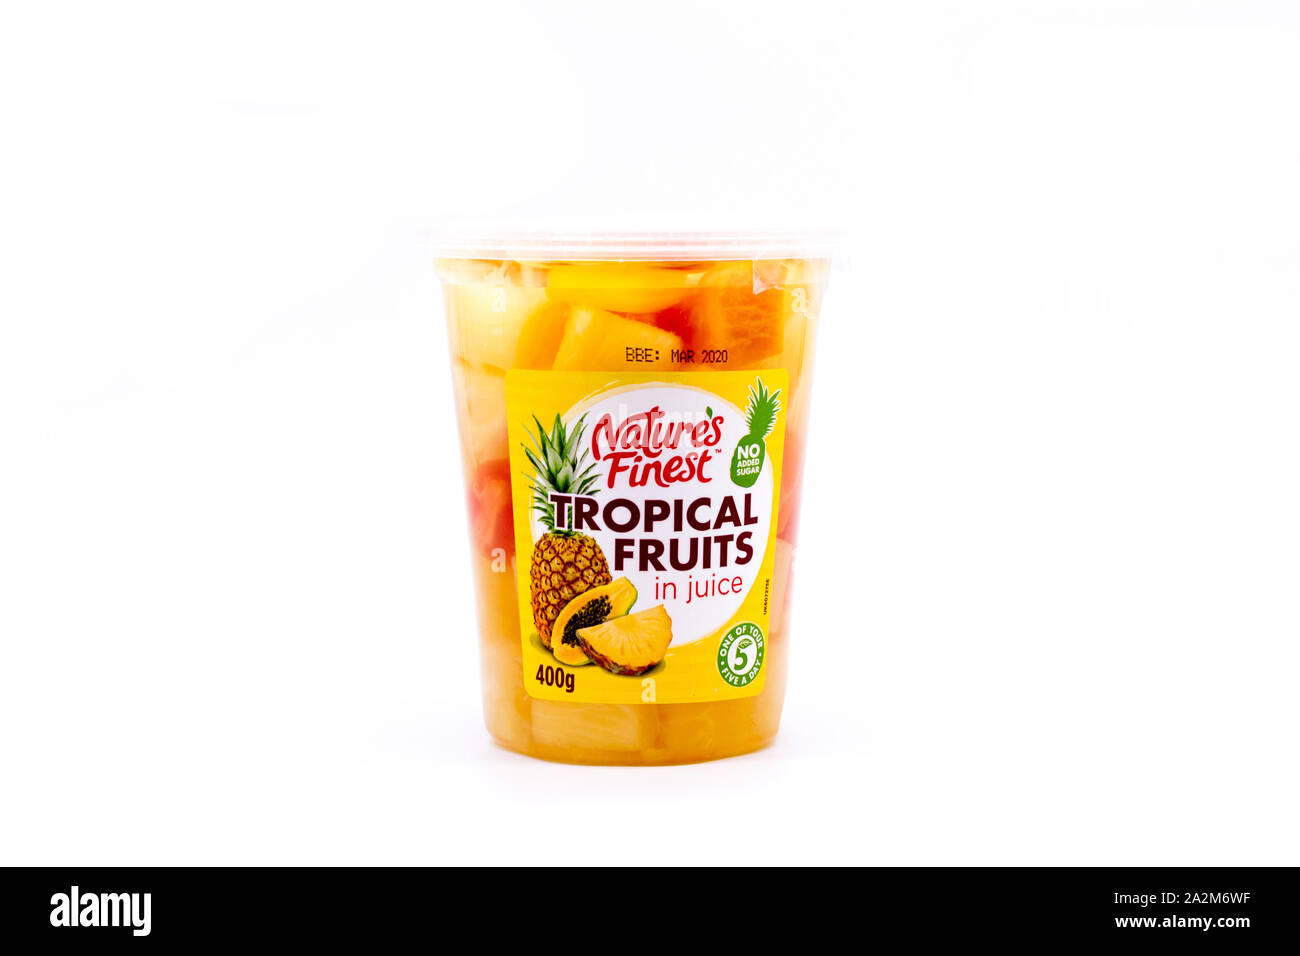 Carton of 'Natures Finest' tropical fruits. 1 of your 5 a day. UK Stock Photo